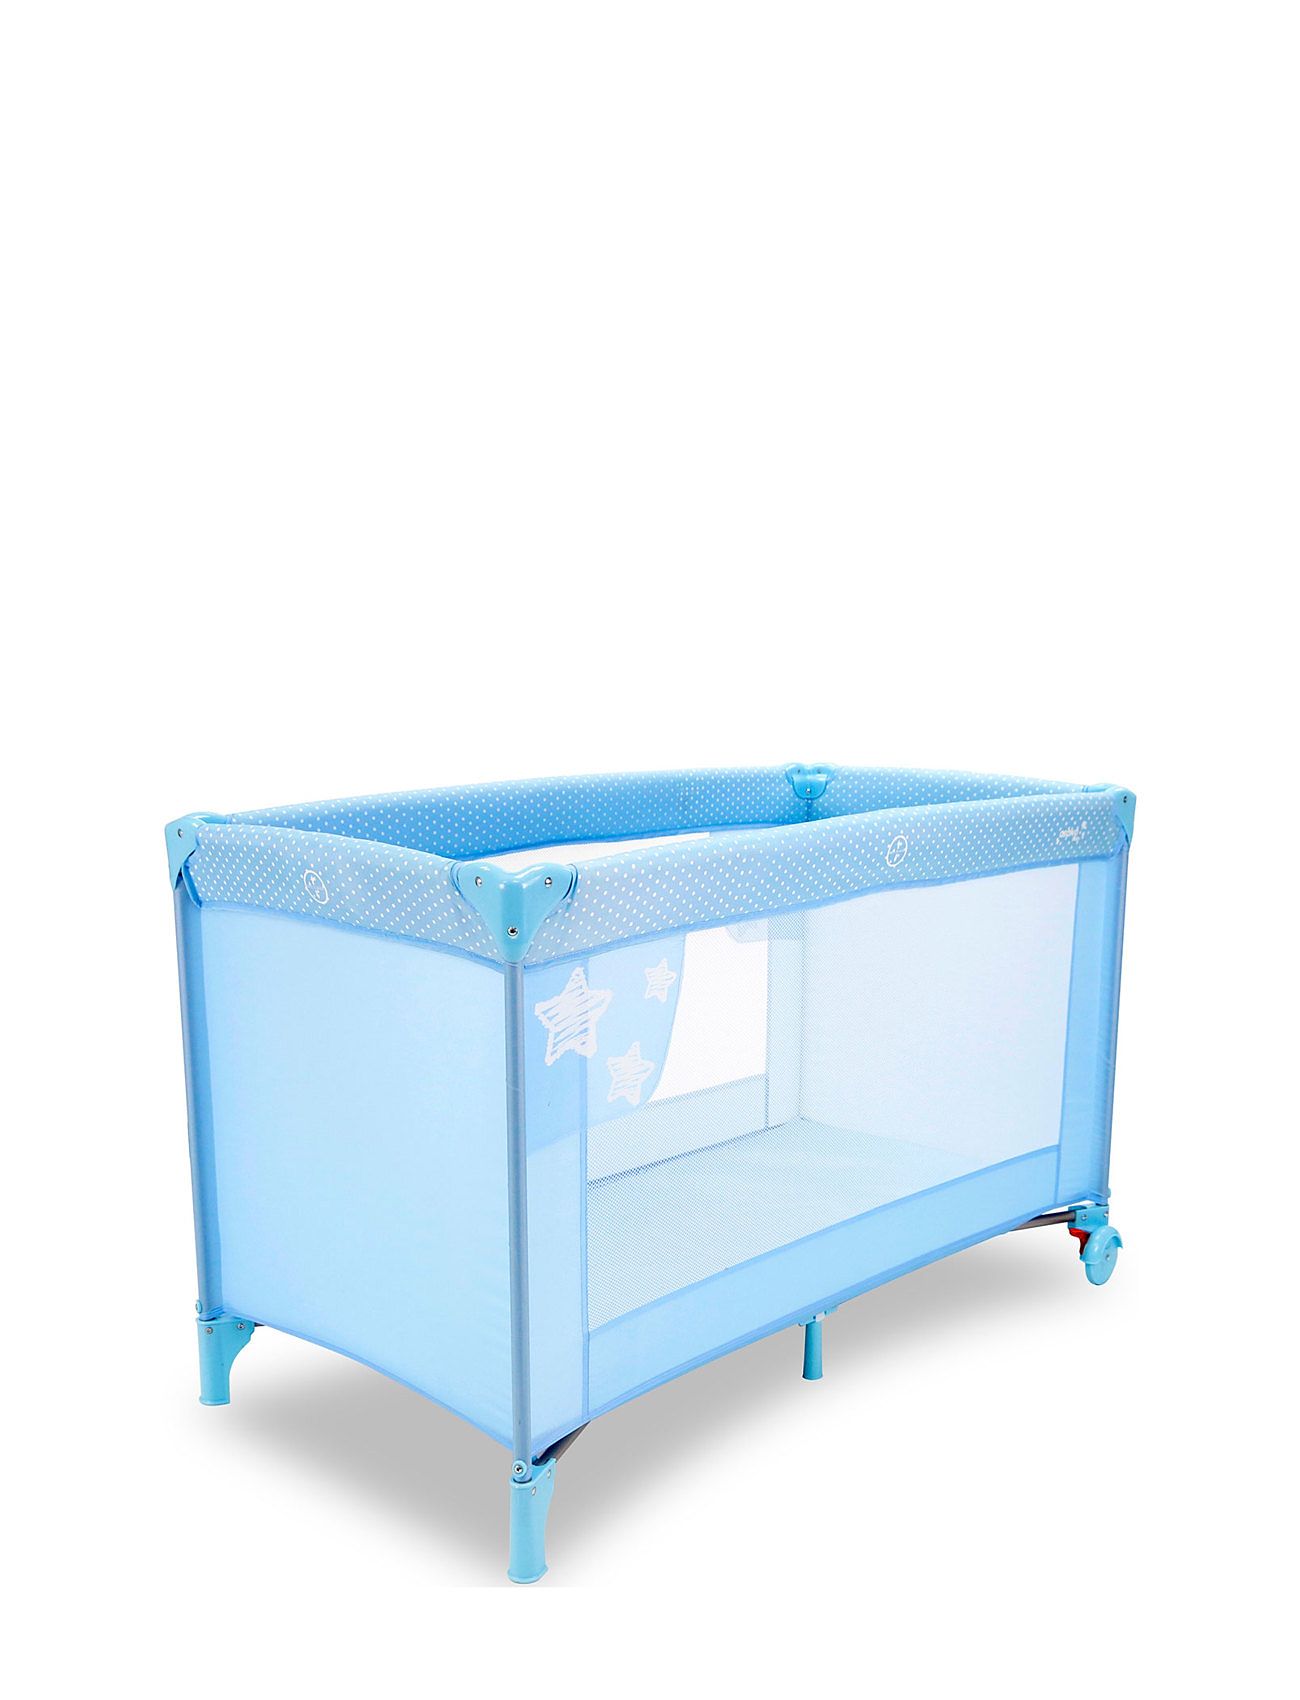 Asalvo Travel Cot Baleares Stars Blue Baby & Maternity Baby Sleep Baby Beds & Accessories Travel Beds Blue Asalvo